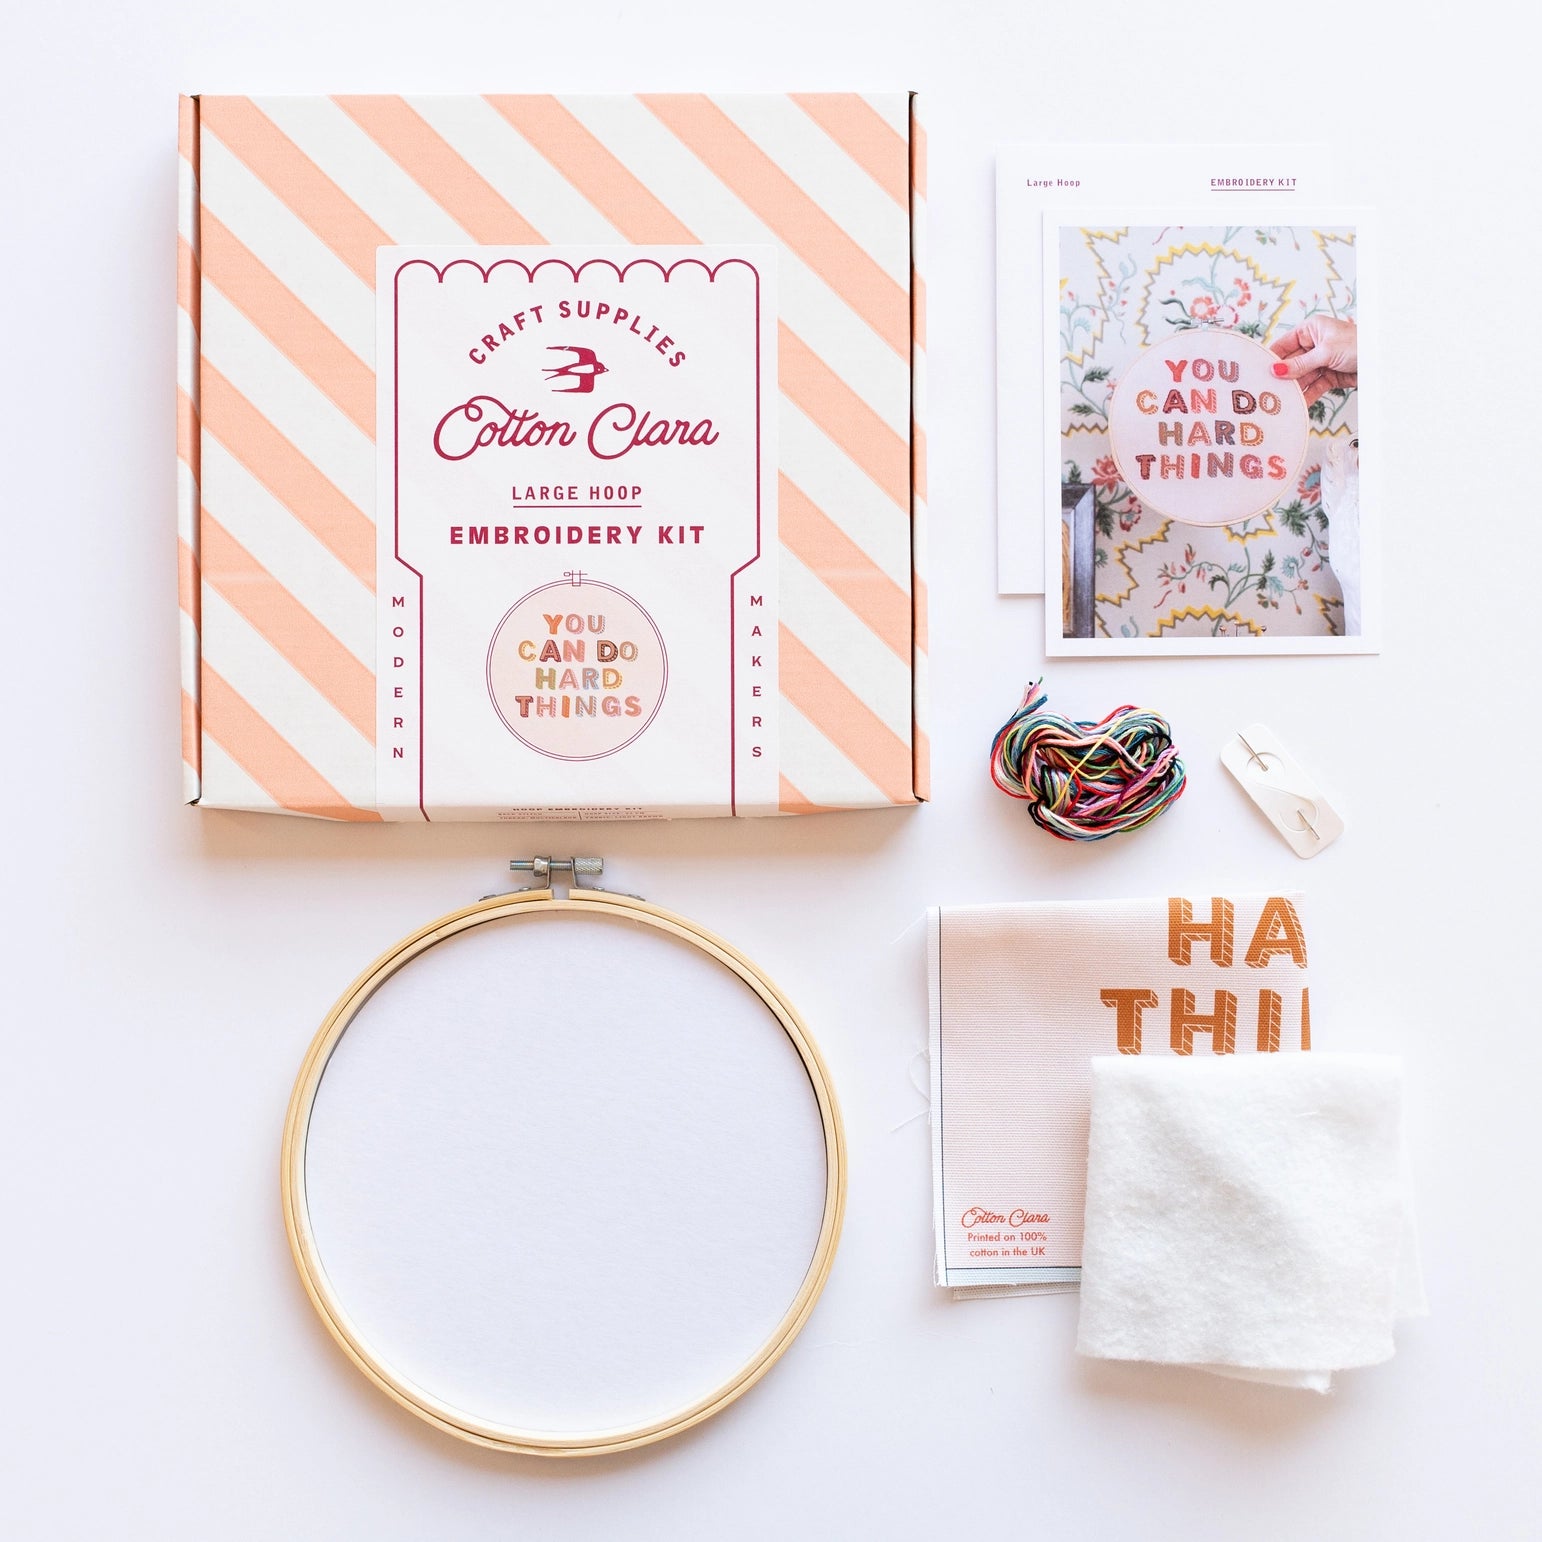 Embroidery Hoop Kit Contents